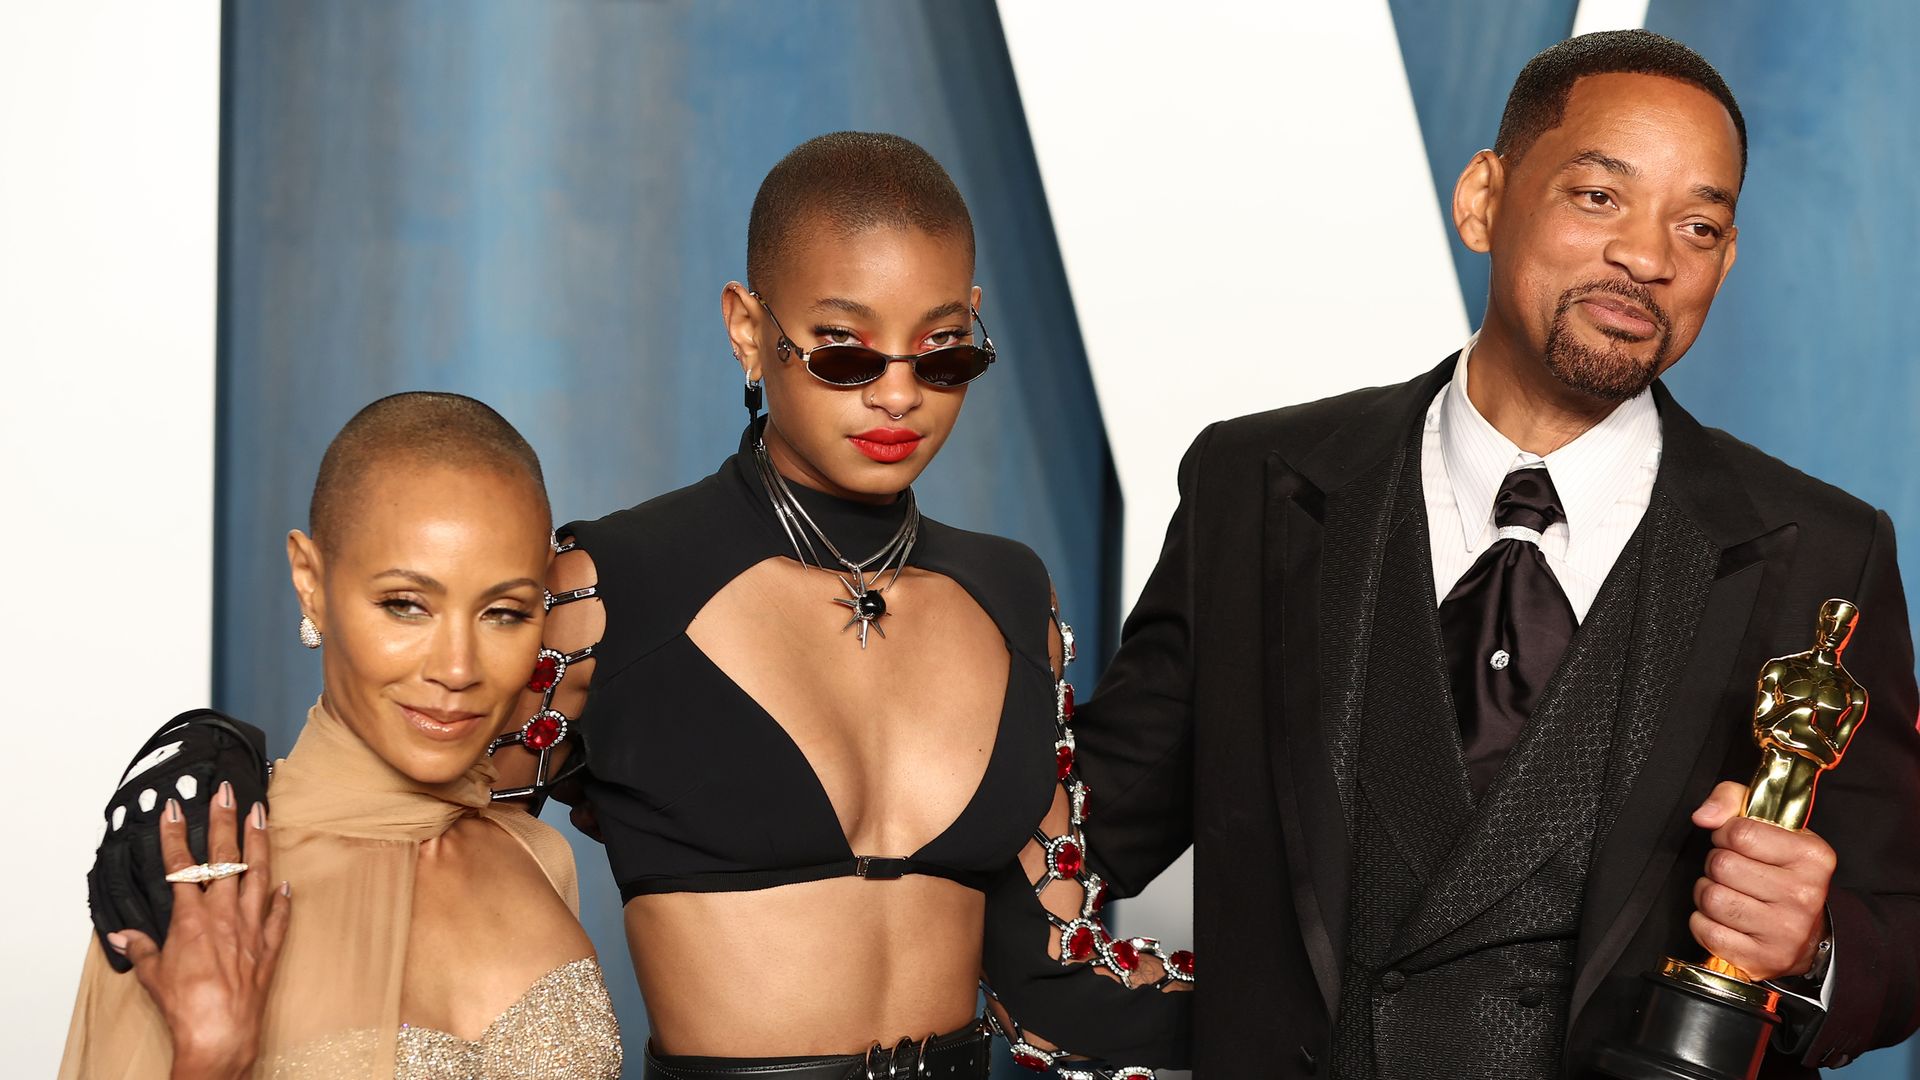 Will Smith and Jada Pinkett Smith come together to support 'inspiring' daughter Willow's momentous news